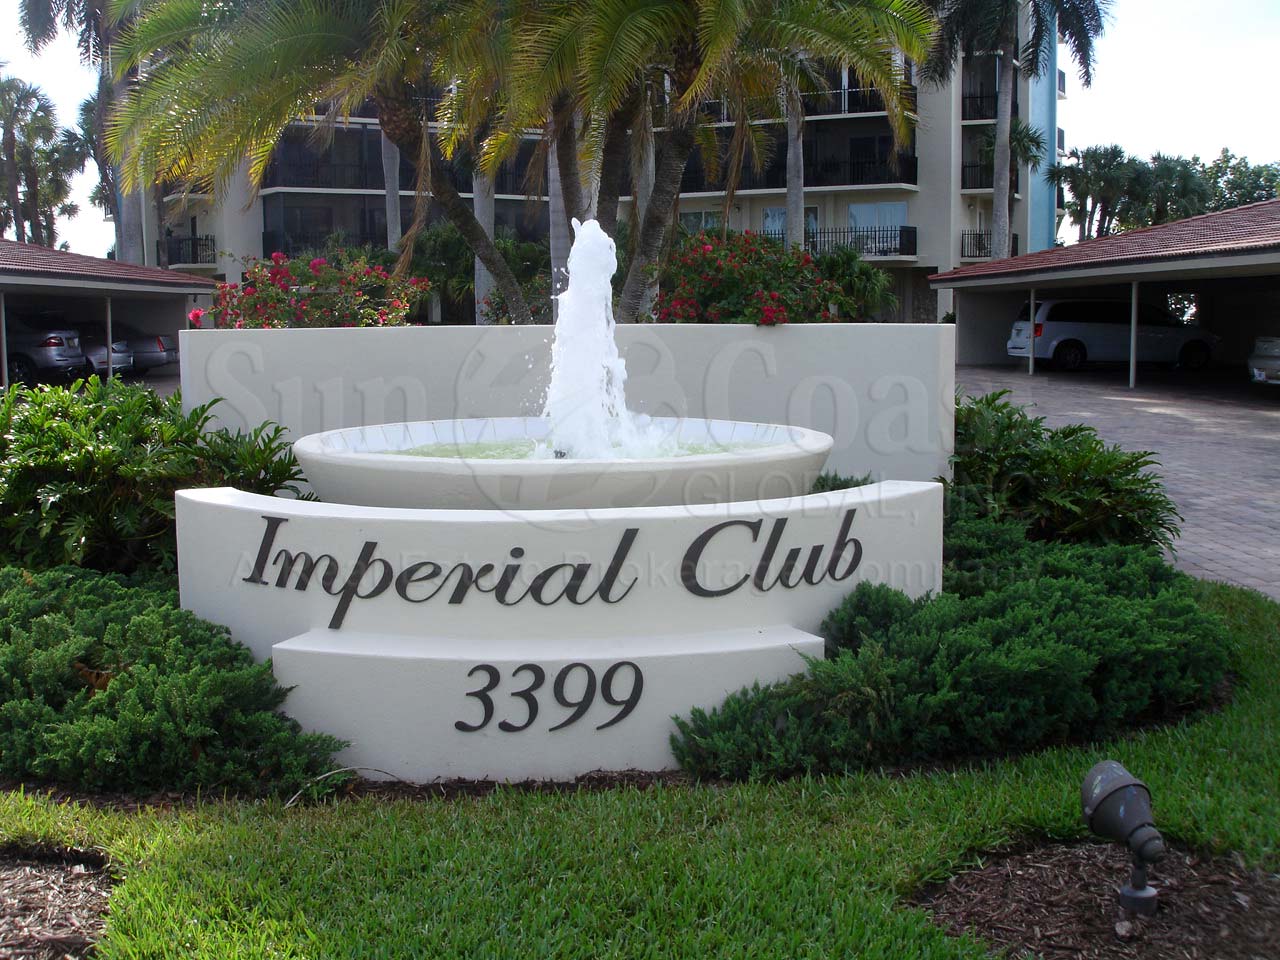 Imperial Club Signage and Fountain